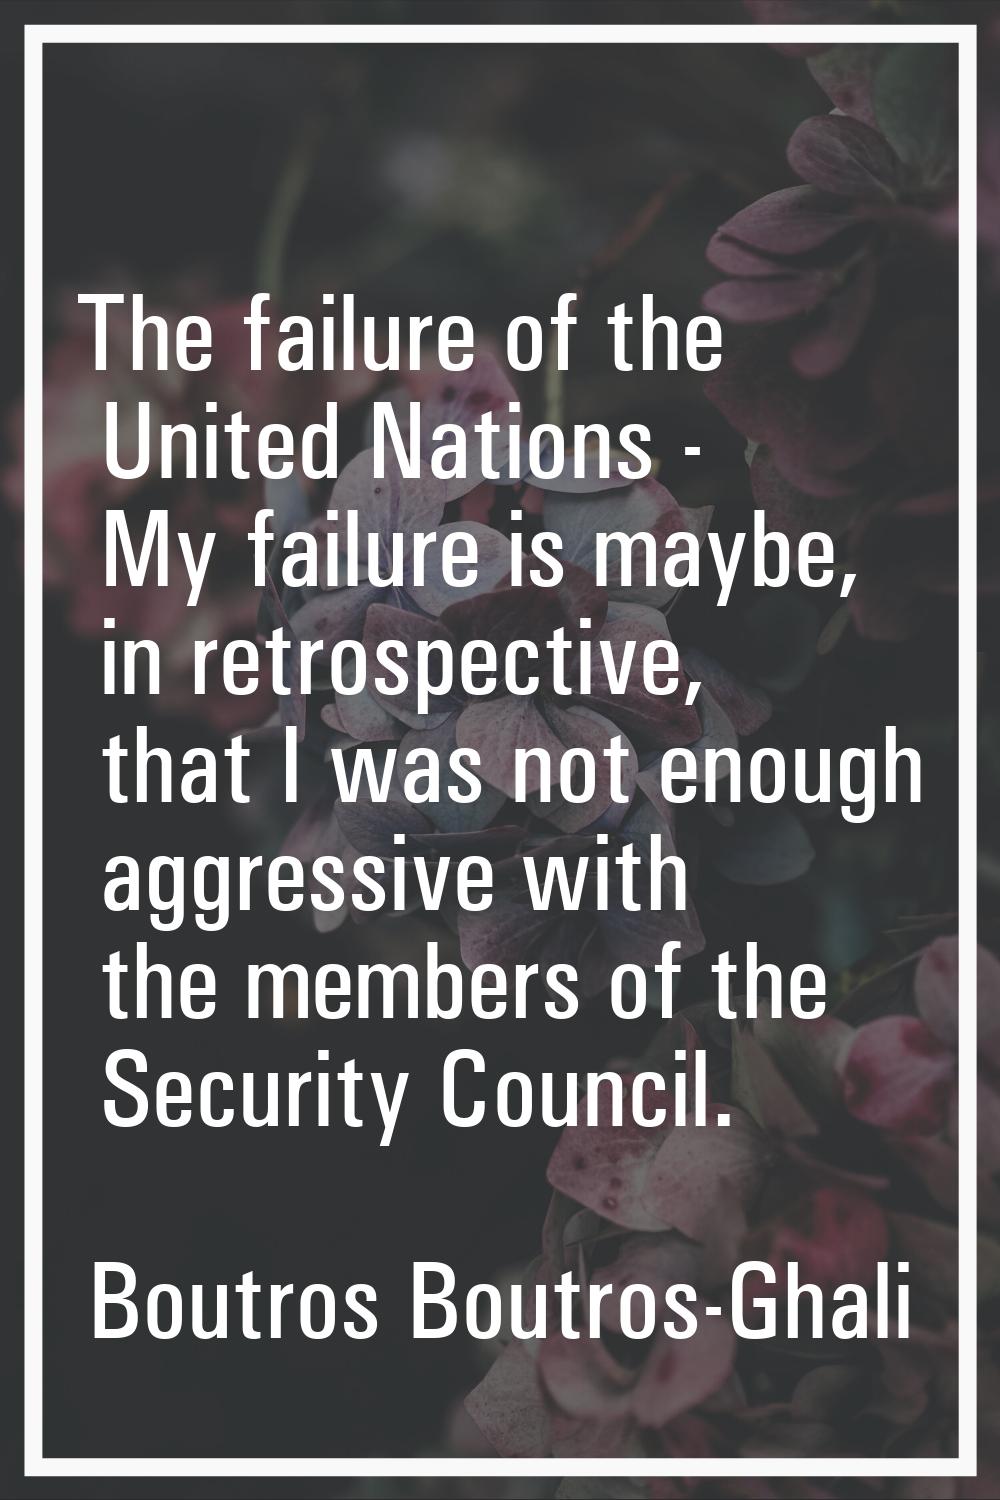 The failure of the United Nations - My failure is maybe, in retrospective, that I was not enough ag